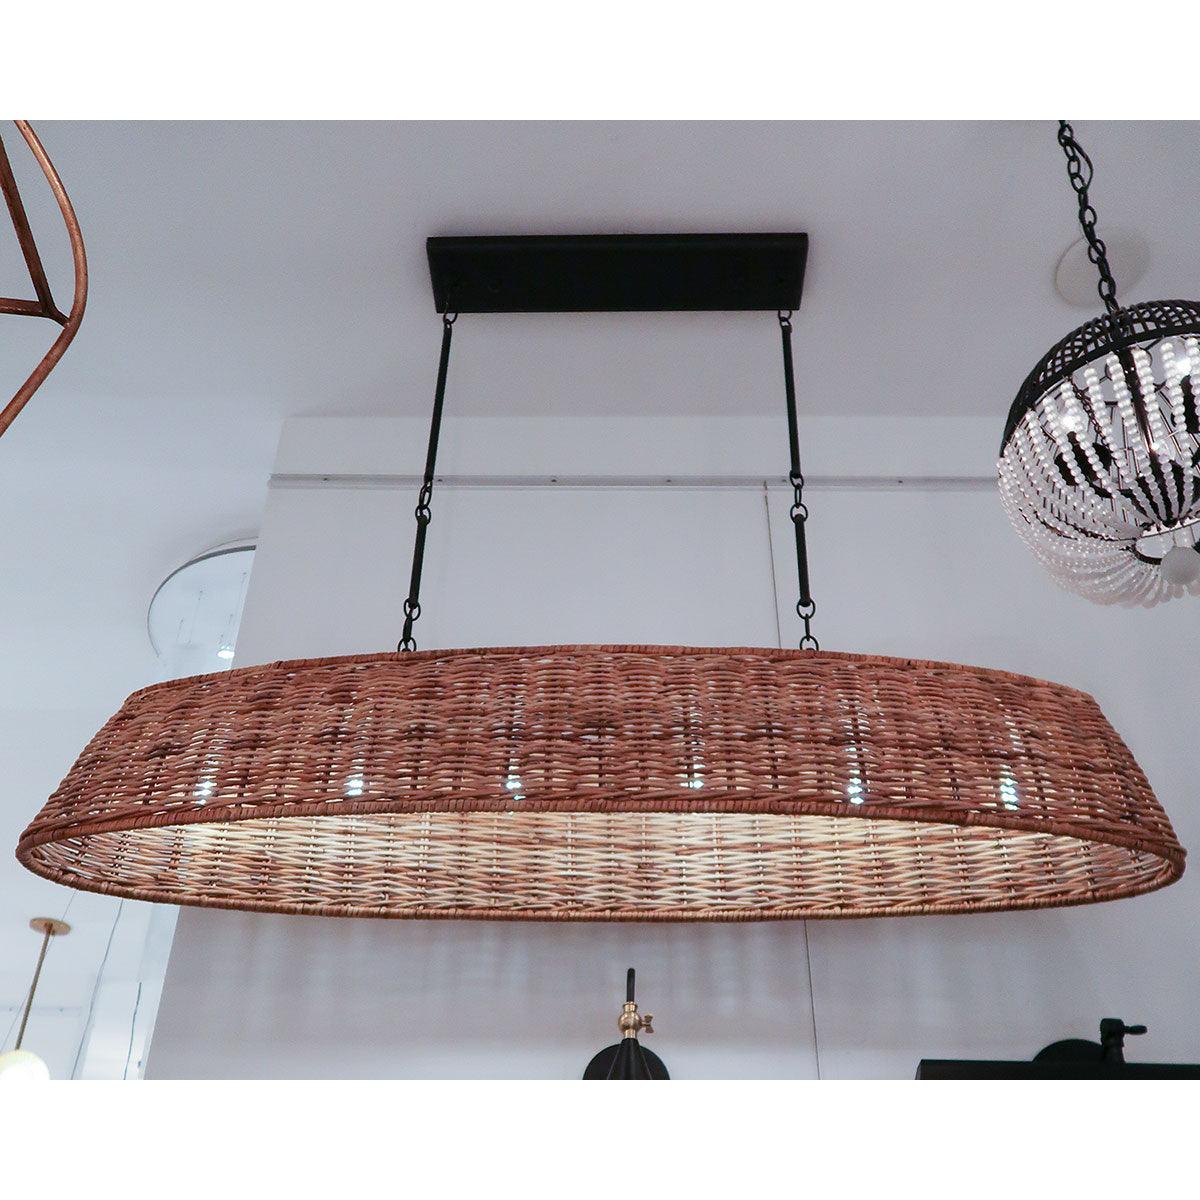 Montreal Lighting & Hardware - Basket Chandelier by Currey and Company | Open Box - 9000-0462-OB | Montreal Lighting & Hardware